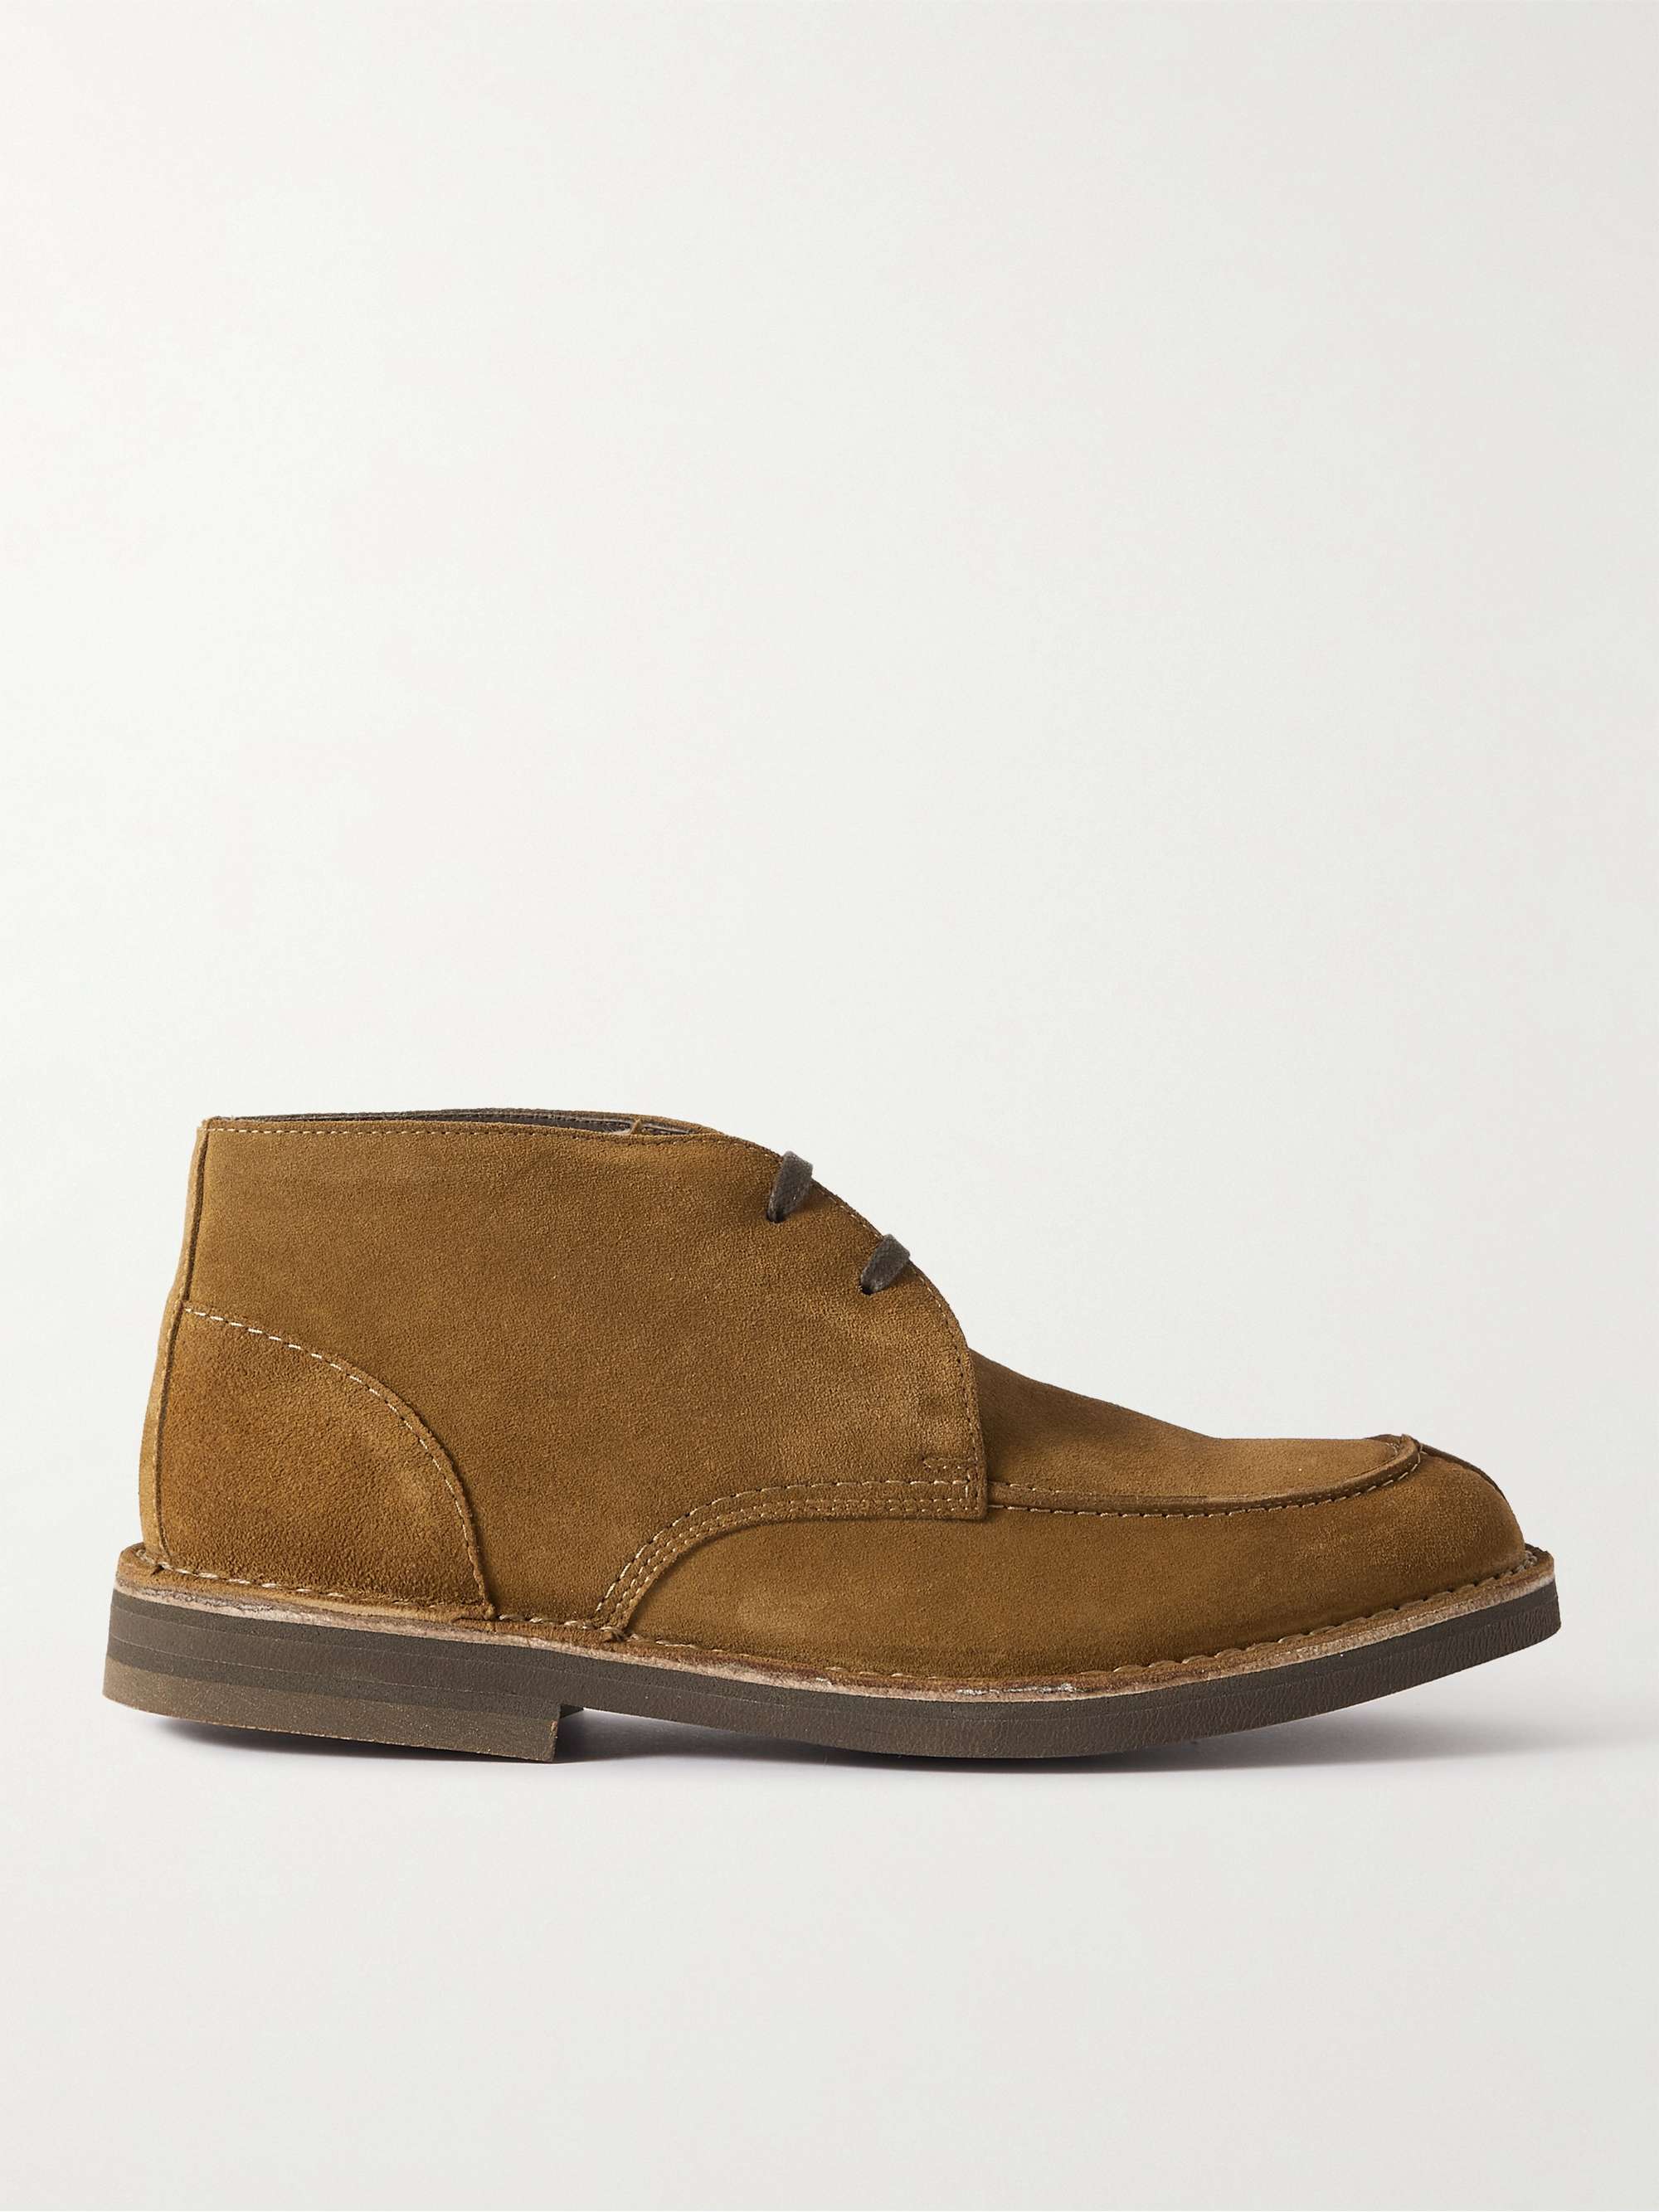 MR P. Andrew Split-Toe Shearling-Lined Suede Chukka Boots